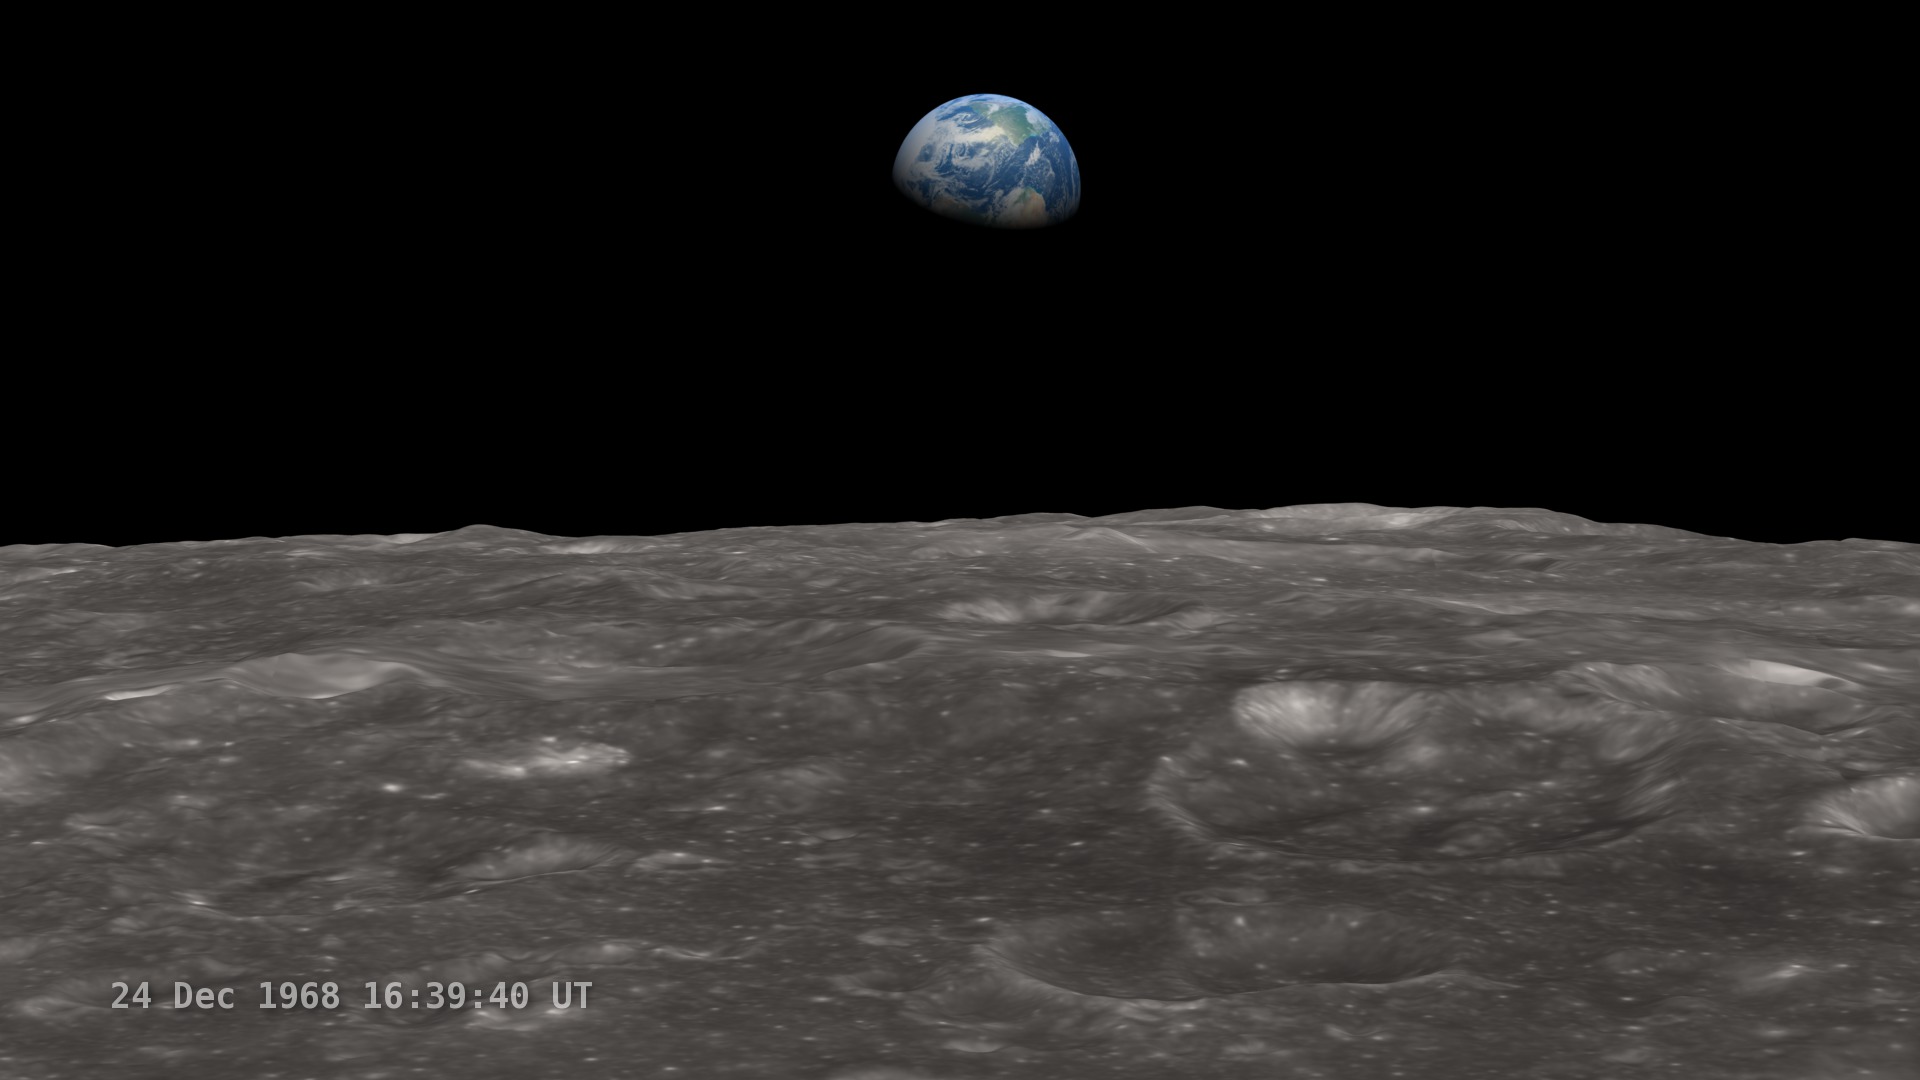 A simulation of what the Apollo 8 crew saw as the Earth rose above the lunar horizon during their fourth orbit around the Moon. Includes a clock overlay. This version runs at a constant speed and does not overlay the photographs.